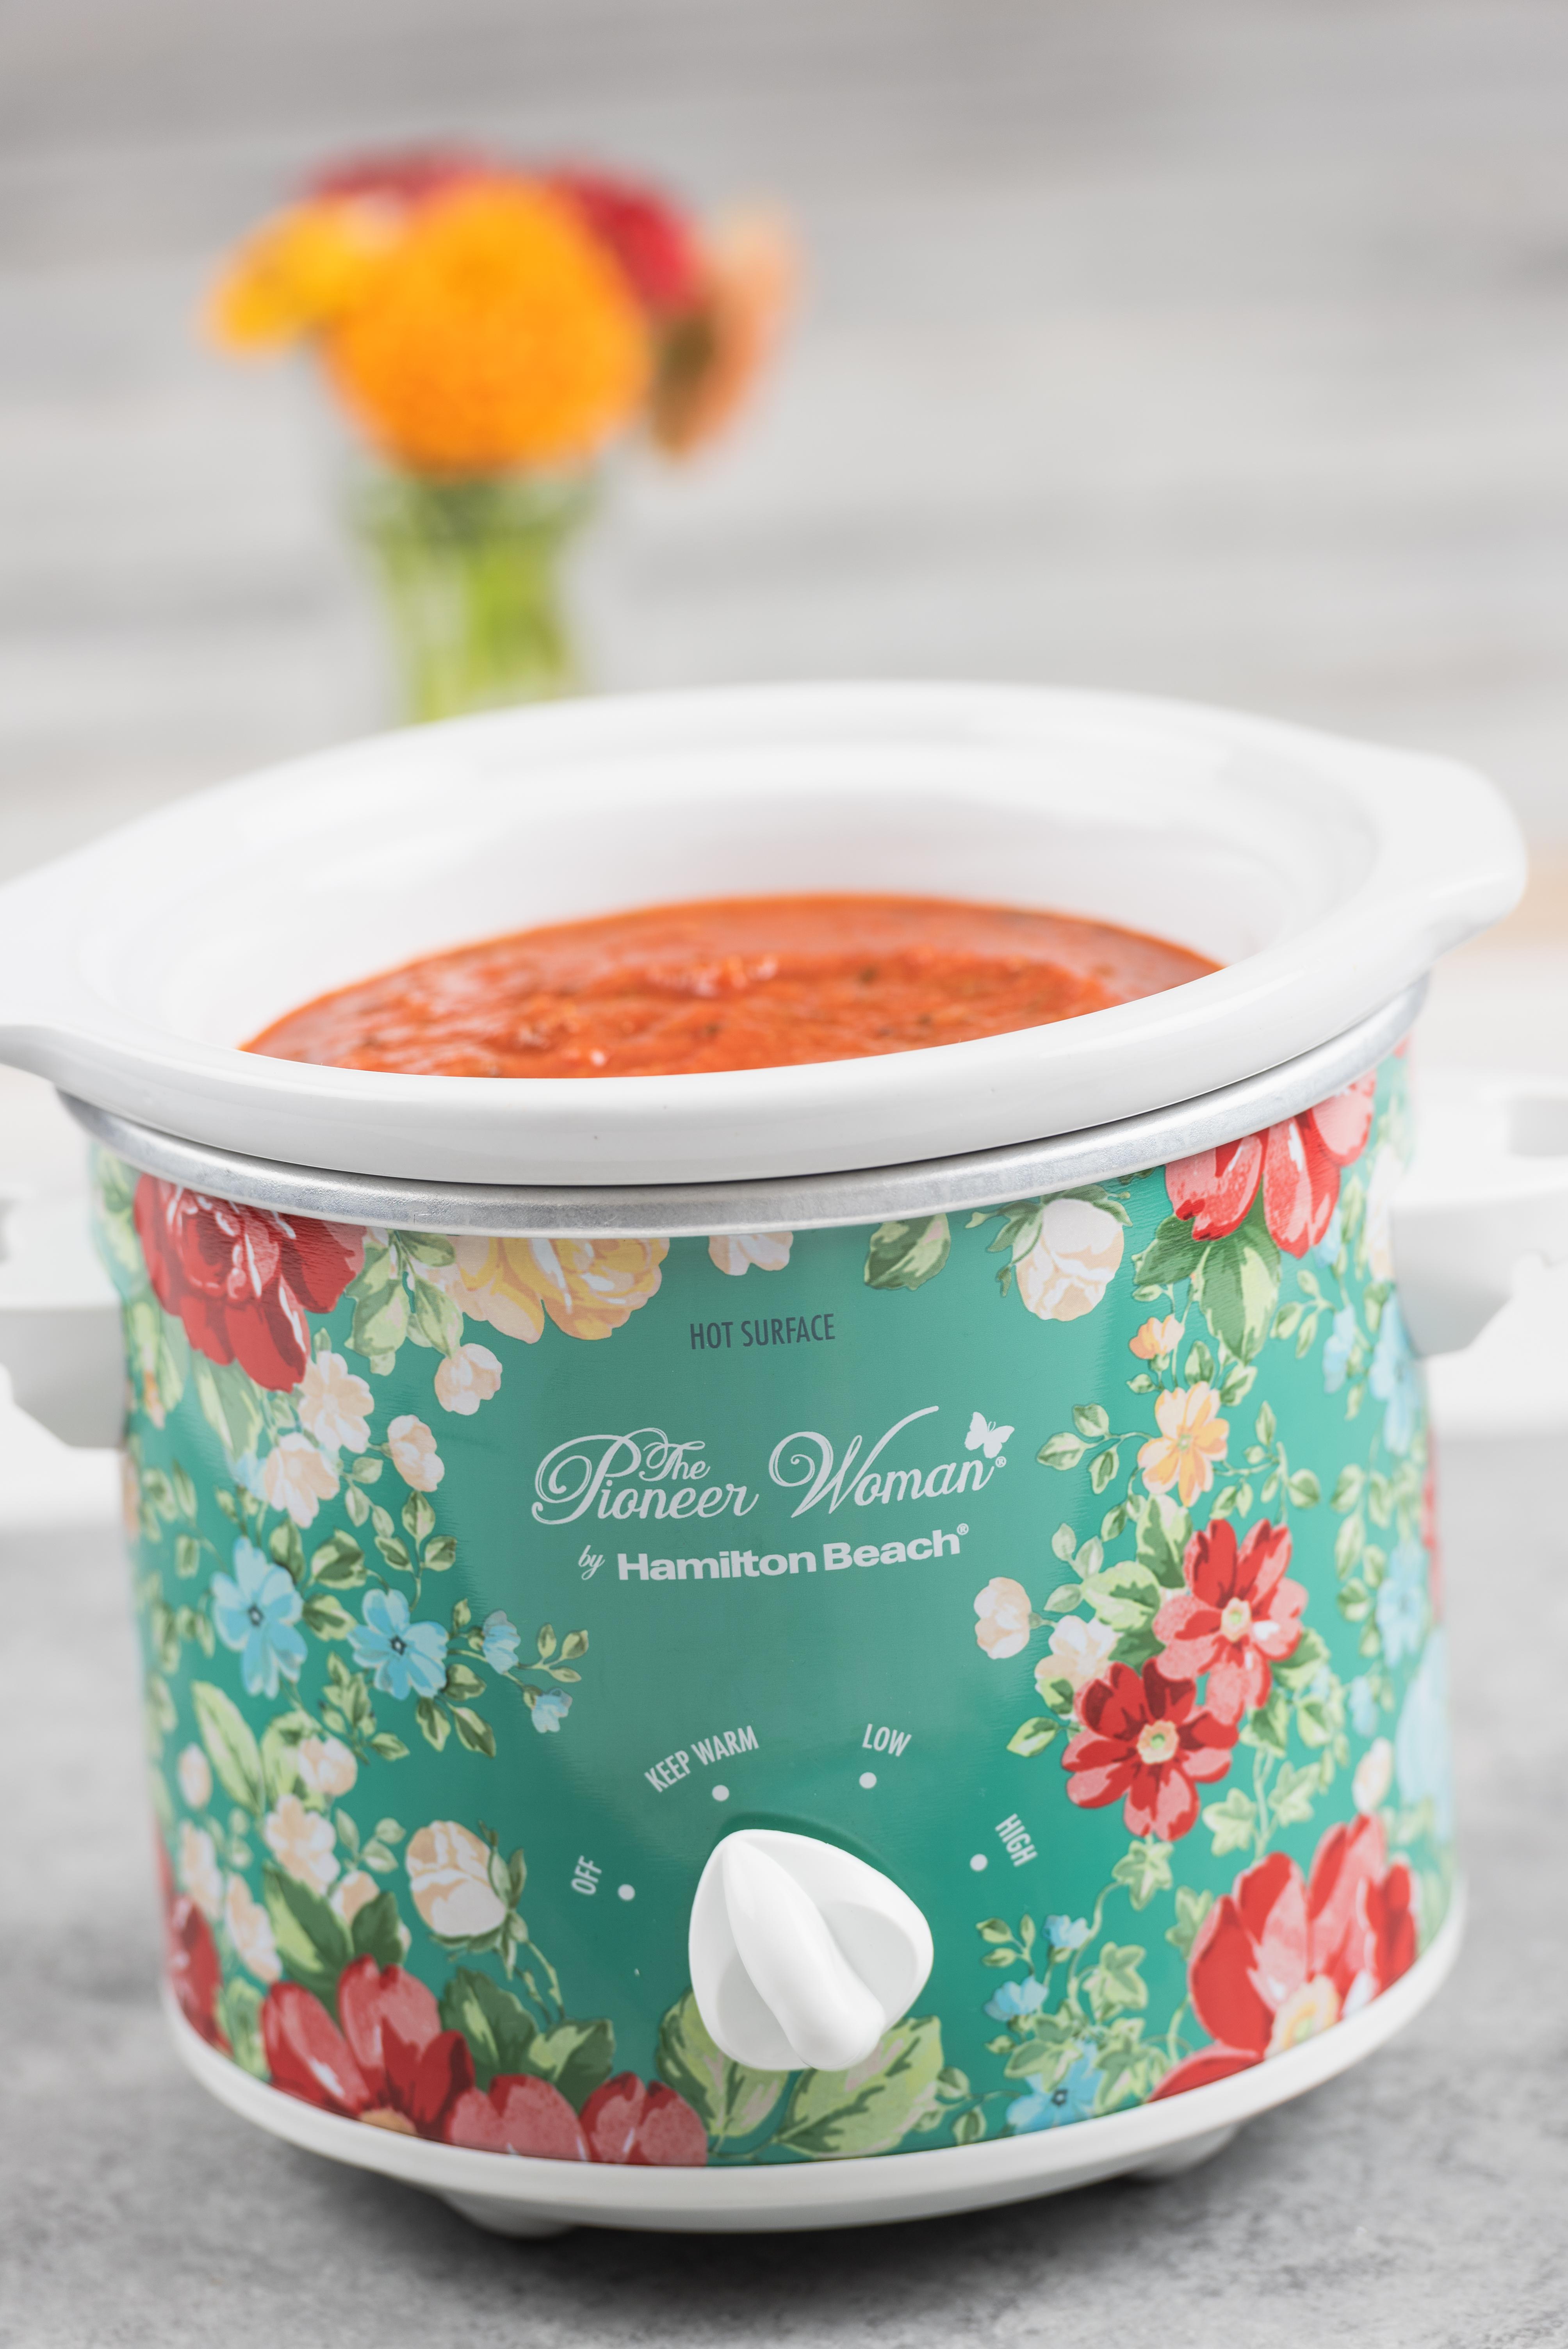 The Pioneer Woman Slow Cooker 1.5 Quart Twin Pack, Fiona Floral and Vintage Floral, 33016 - image 2 of 6